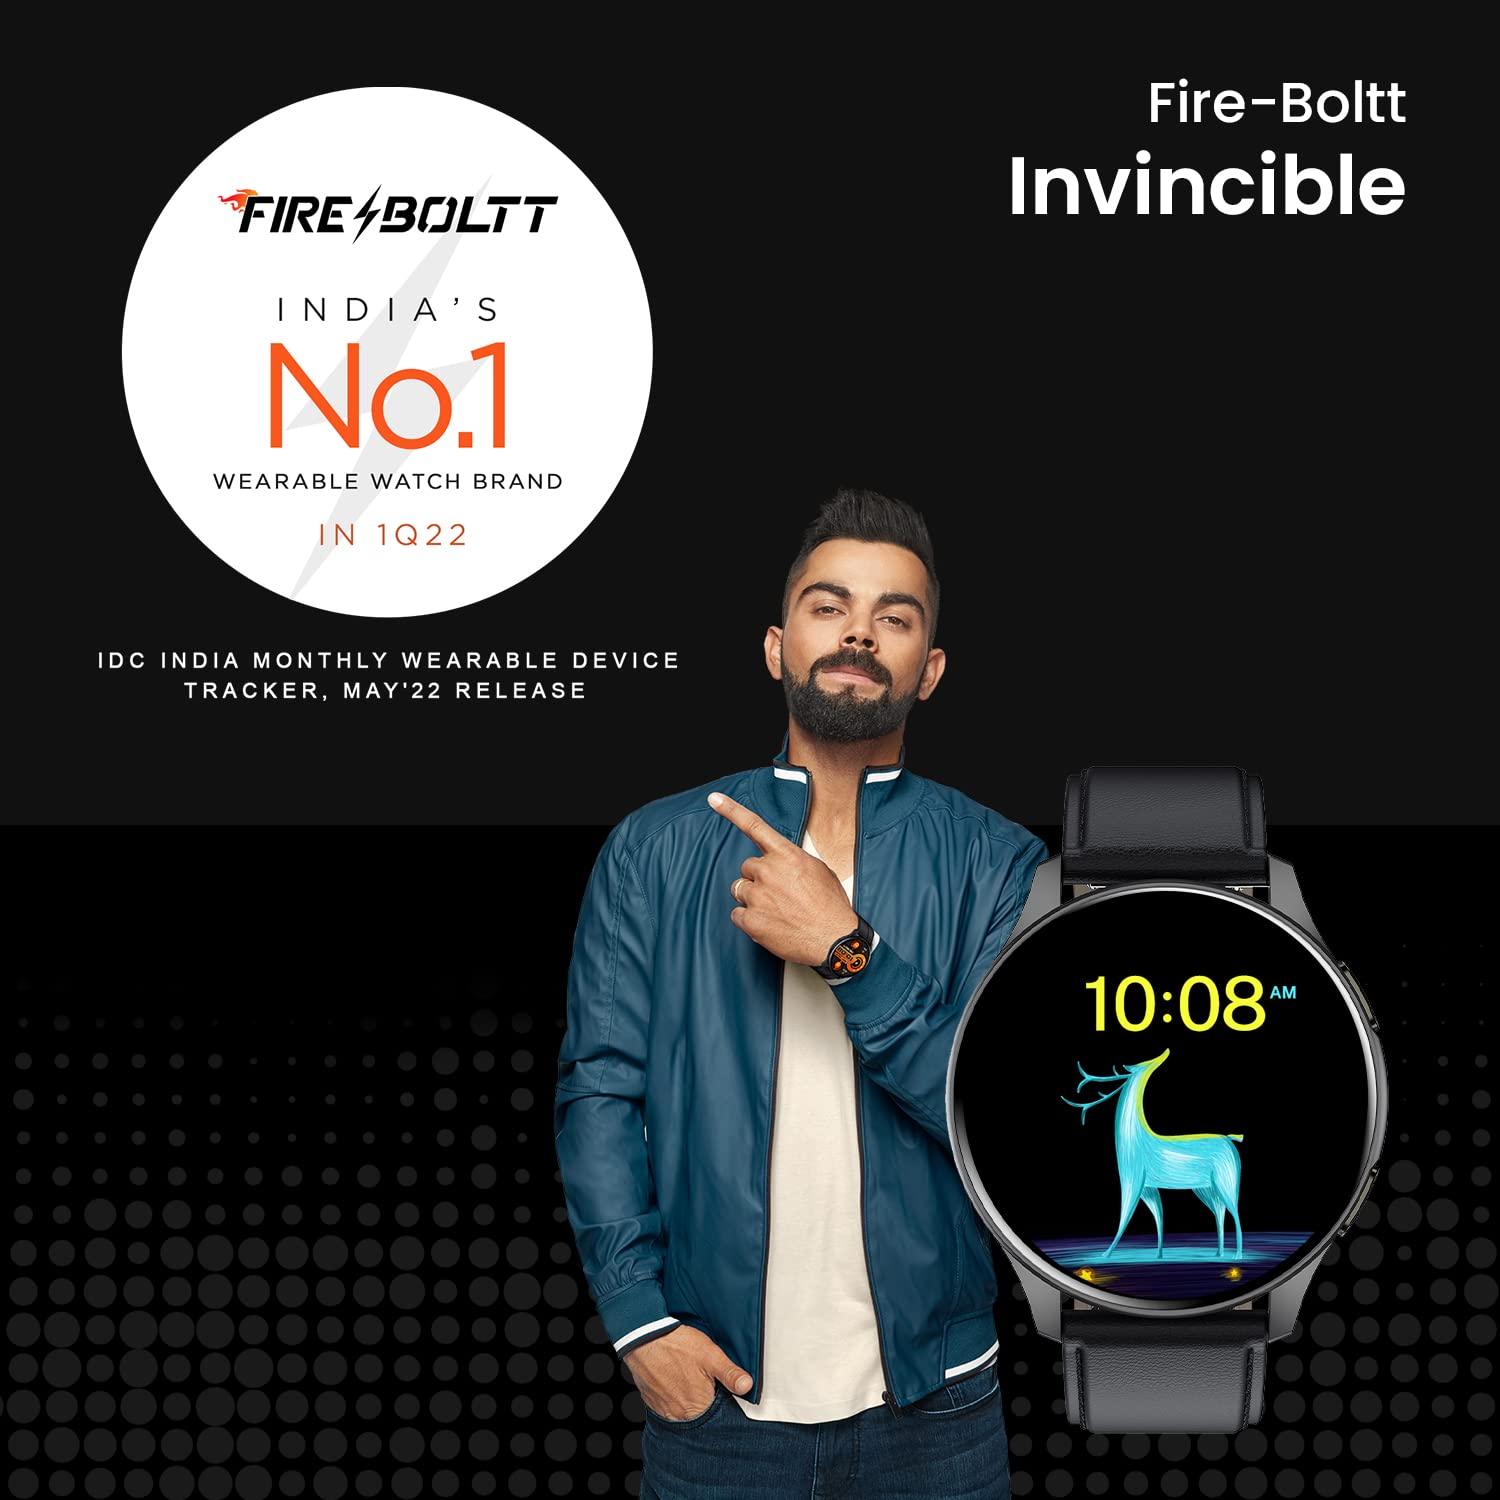 Fire-Boltt INVINCIBLE 1.39 AMOLED Bluetooth Calling ALWAYS ON & 8GB for 1500+ Songs, Play Music Without Phone on TWS